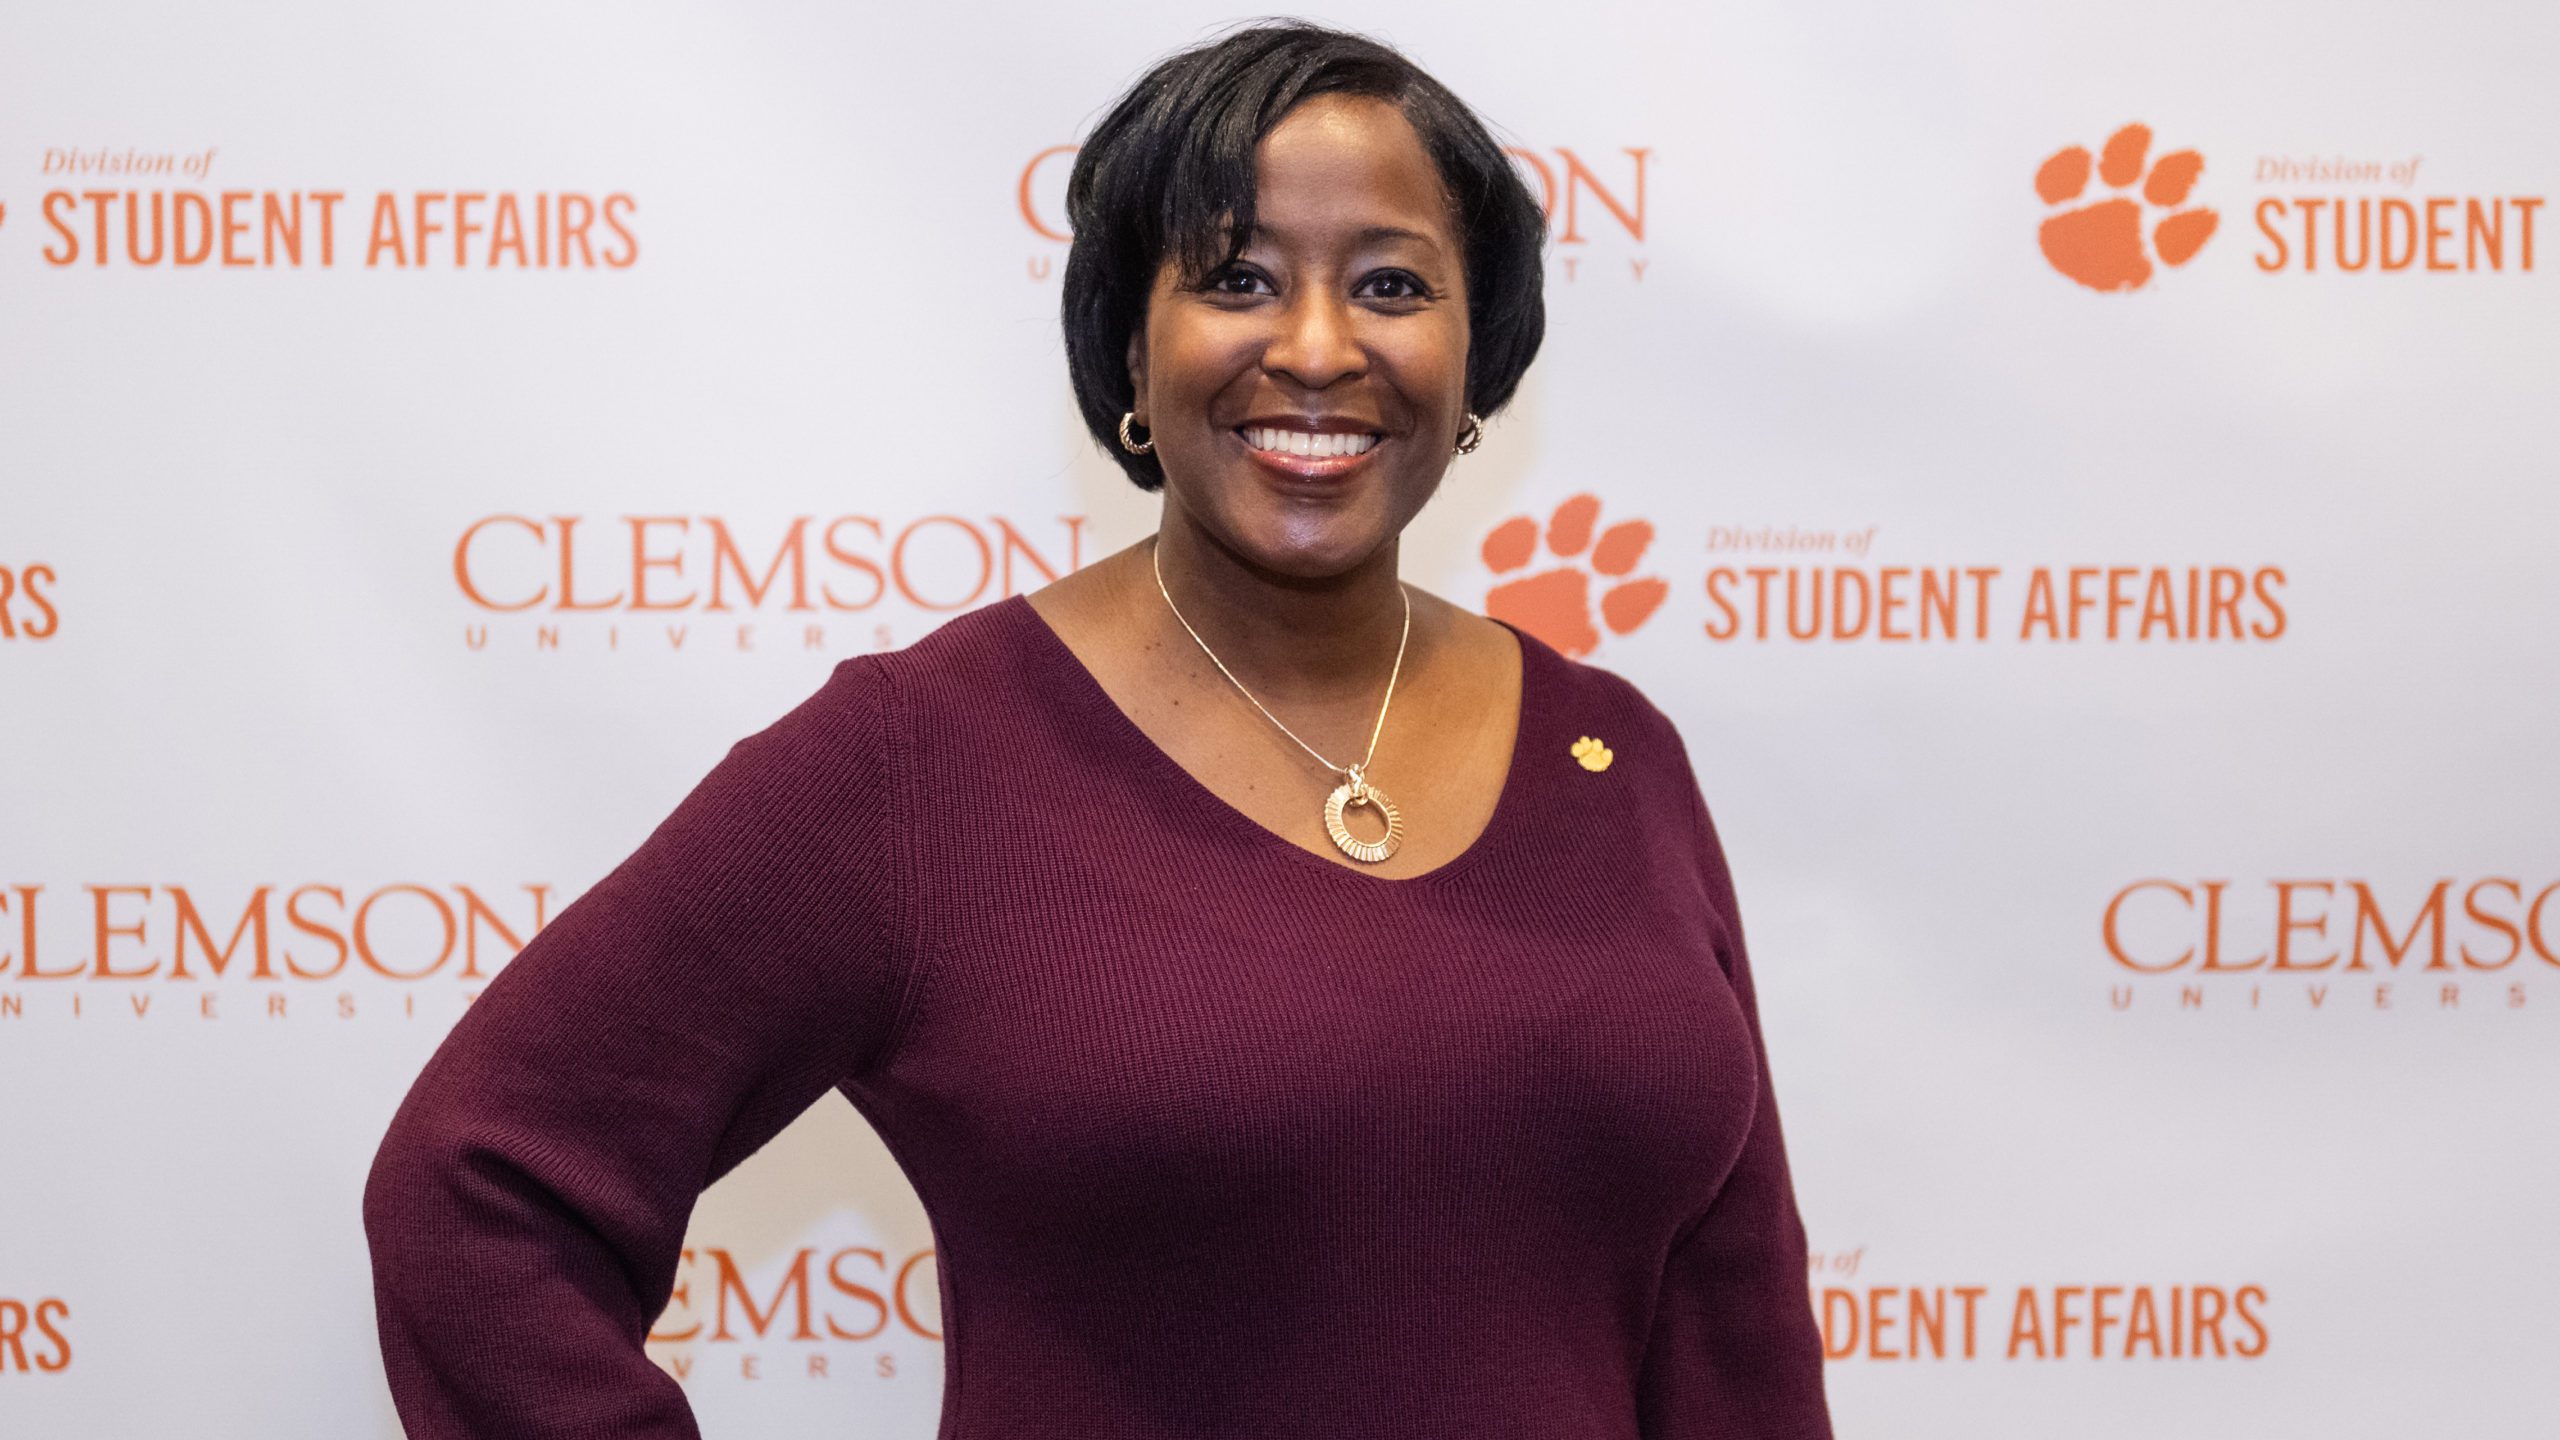 Dr. Kimberly Poole, assistant vice president for the Division of Student Affairs